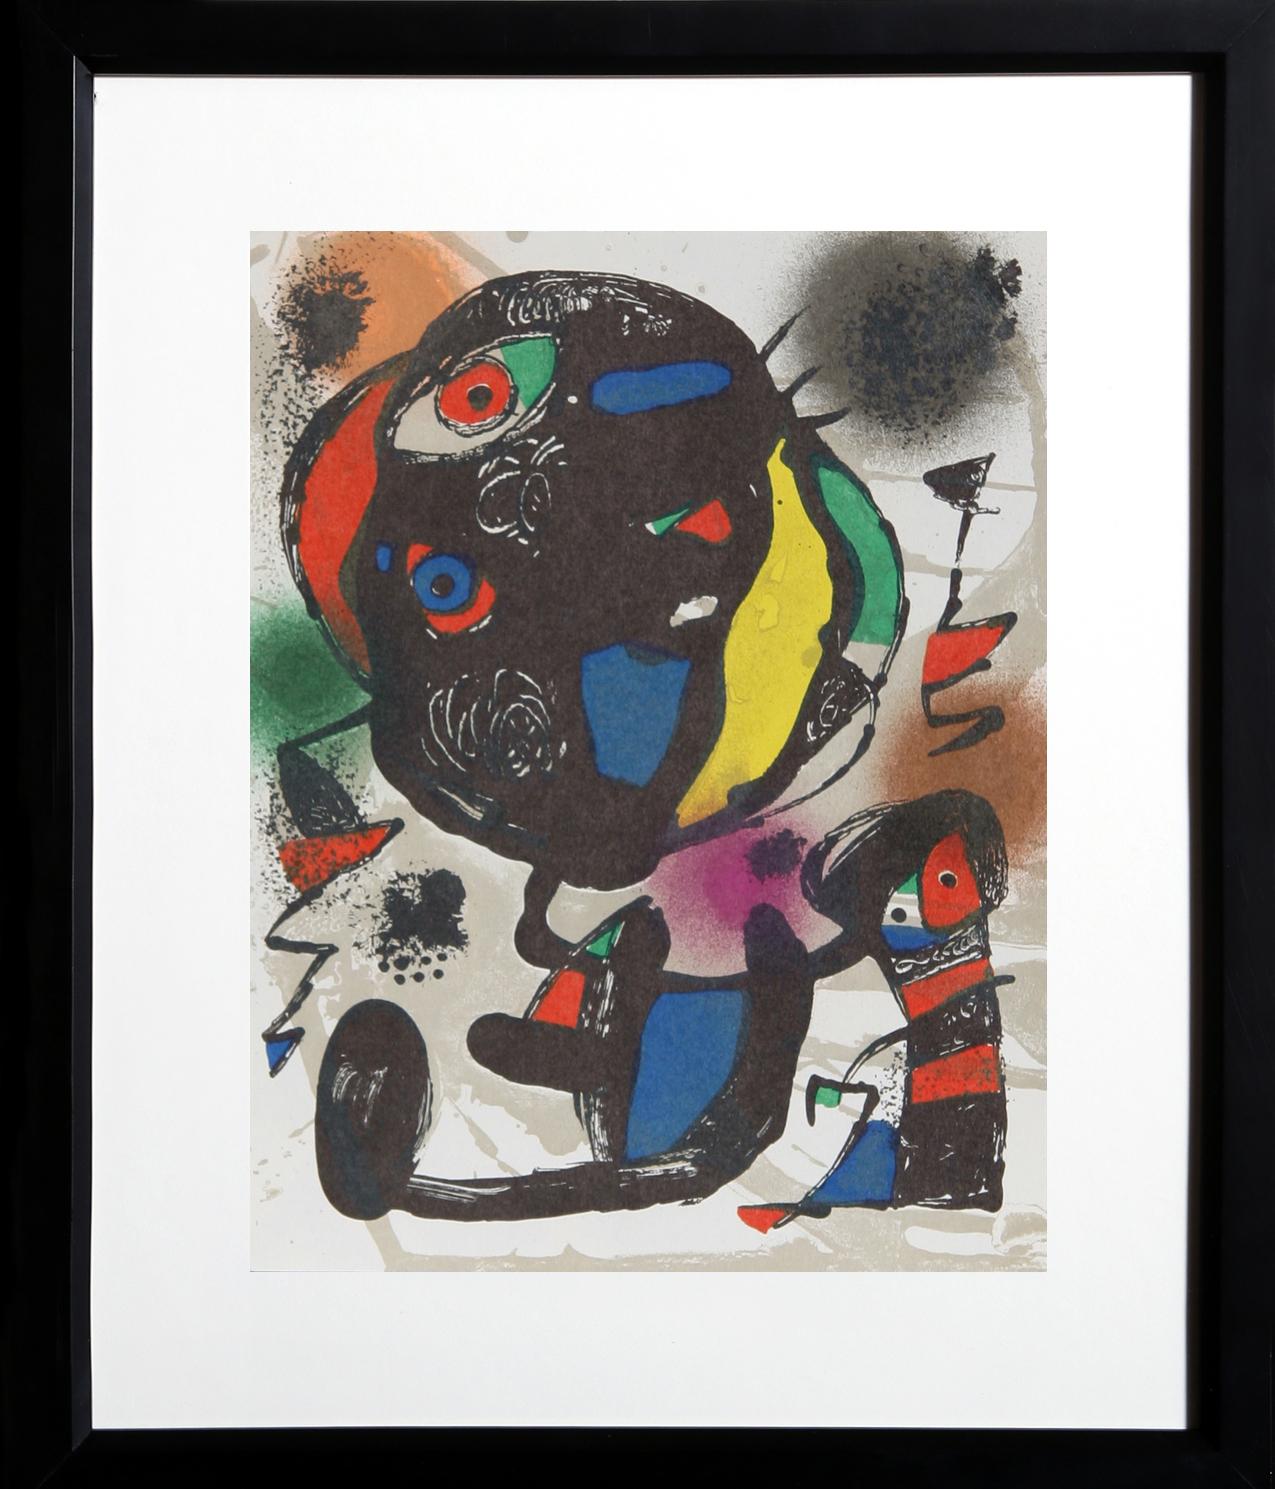 Joan Miro is known for his abstract, expressive, and child-like Modern style. Original lithograph published in Miro Lithographe V Catalogue Raisonne. Nicely framed.

Lithograph V (1260)
Joan Miro, Spanish (1893–1983)
Date: 1975
Lithograph
Size: 12 x